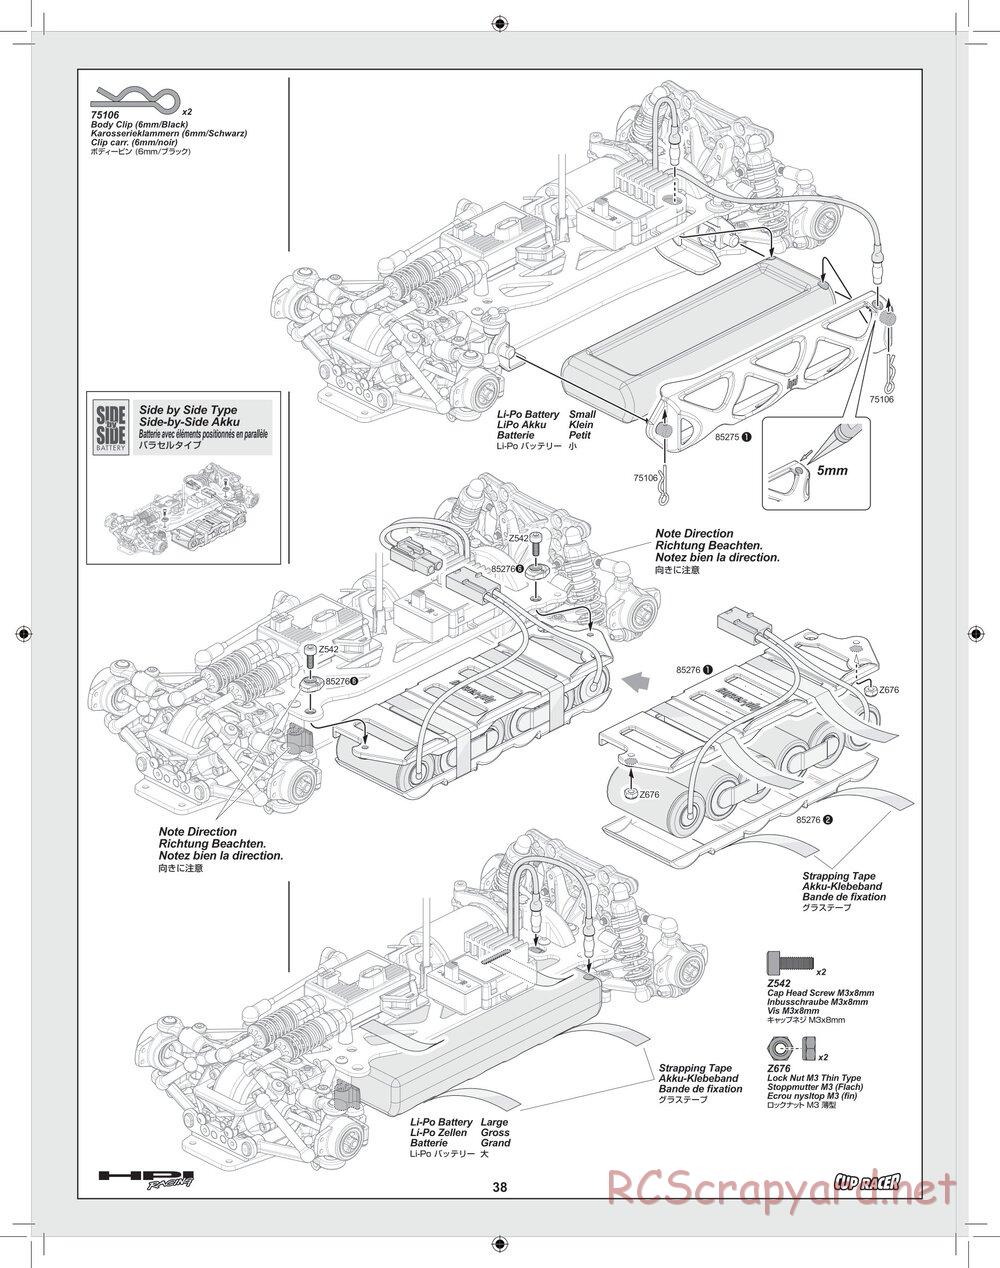 HPI - Cup Racer - Manual - Page 38